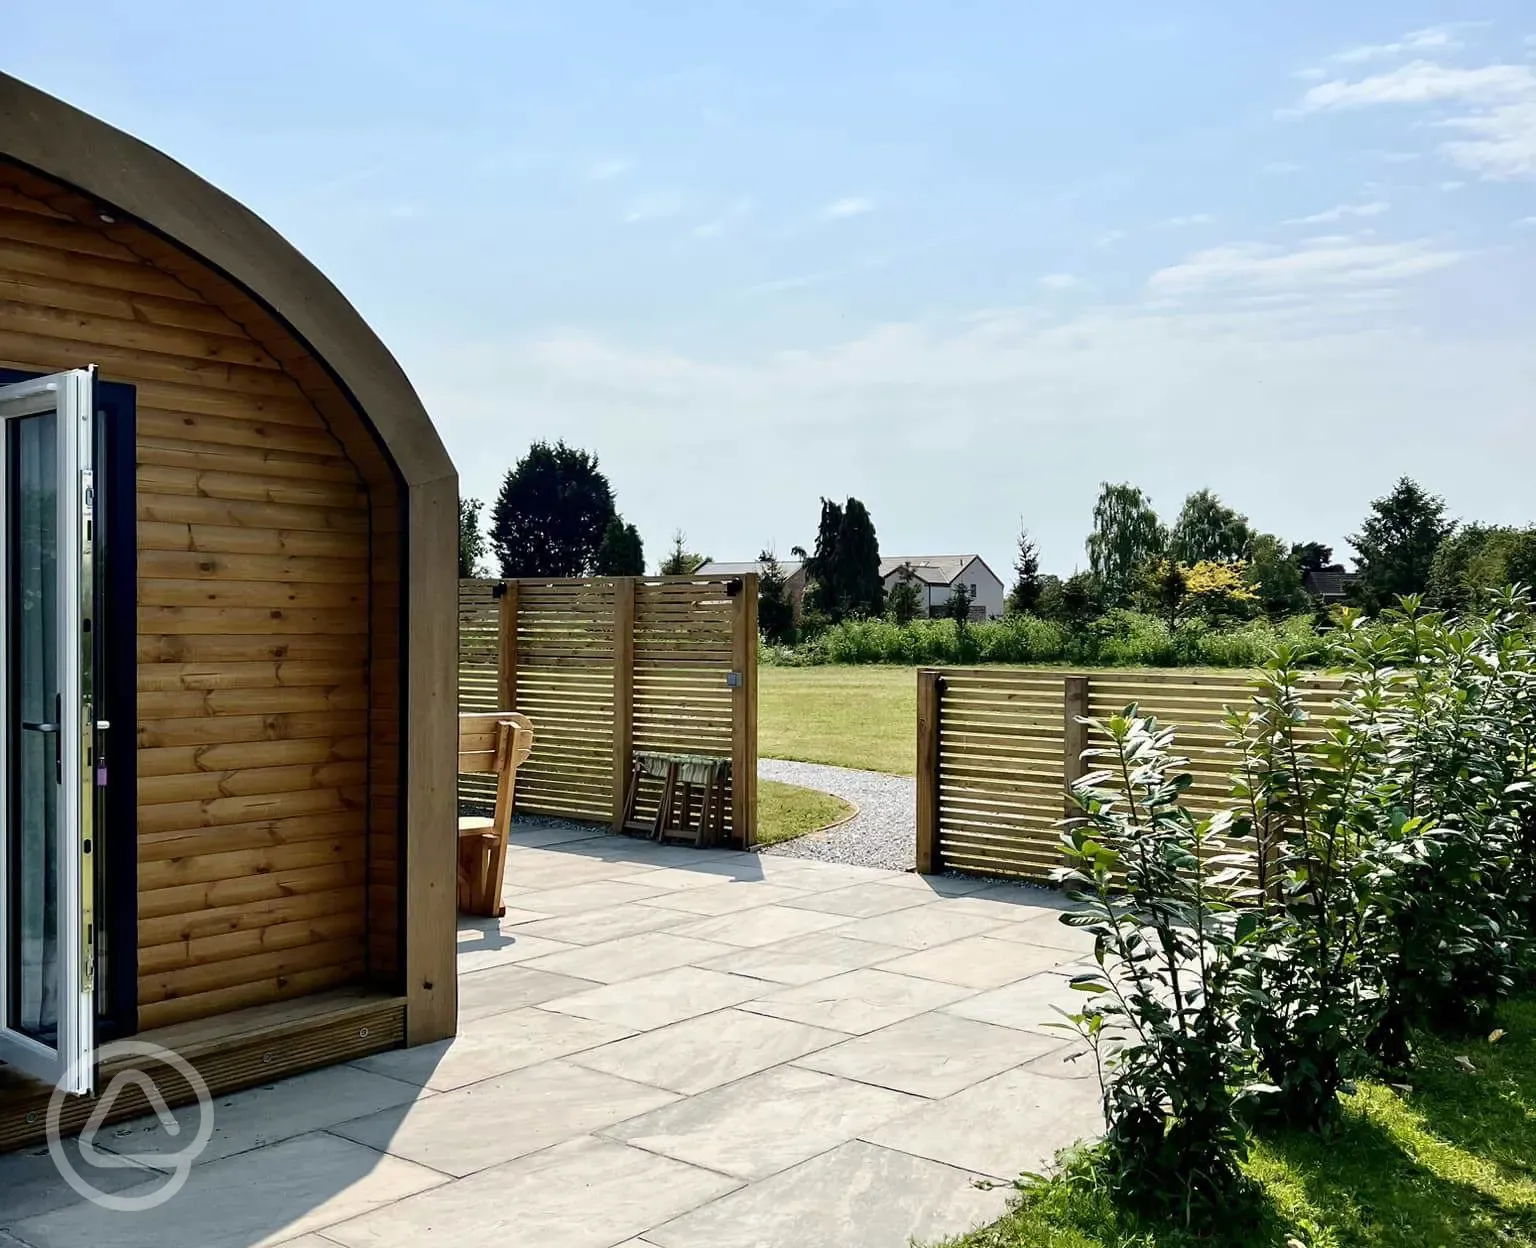 Glamping pod exterior and surroundings